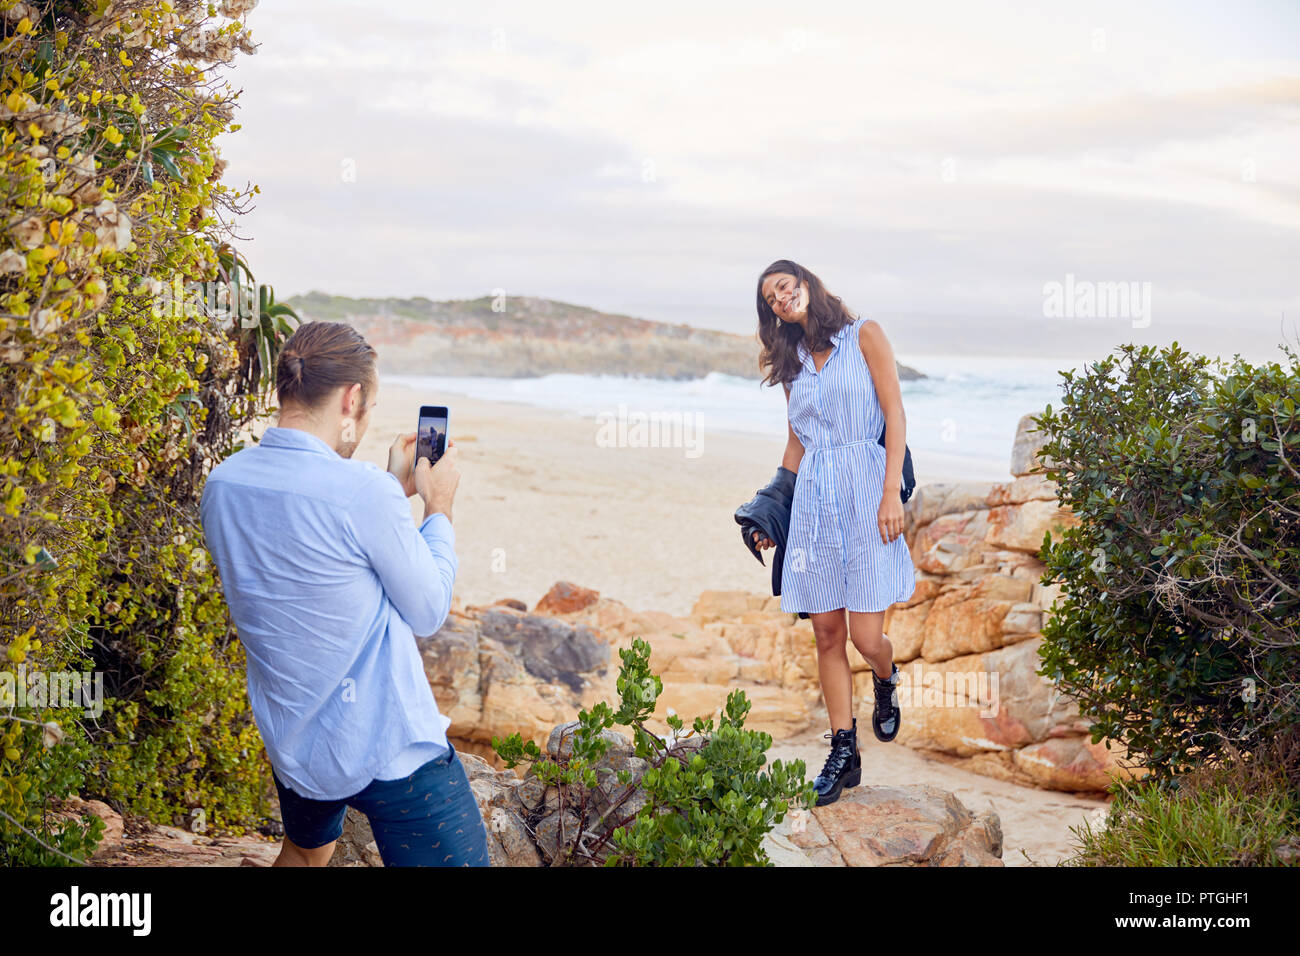 Young man with smart phone photographing girlfriend with ocean in background Stock Photo